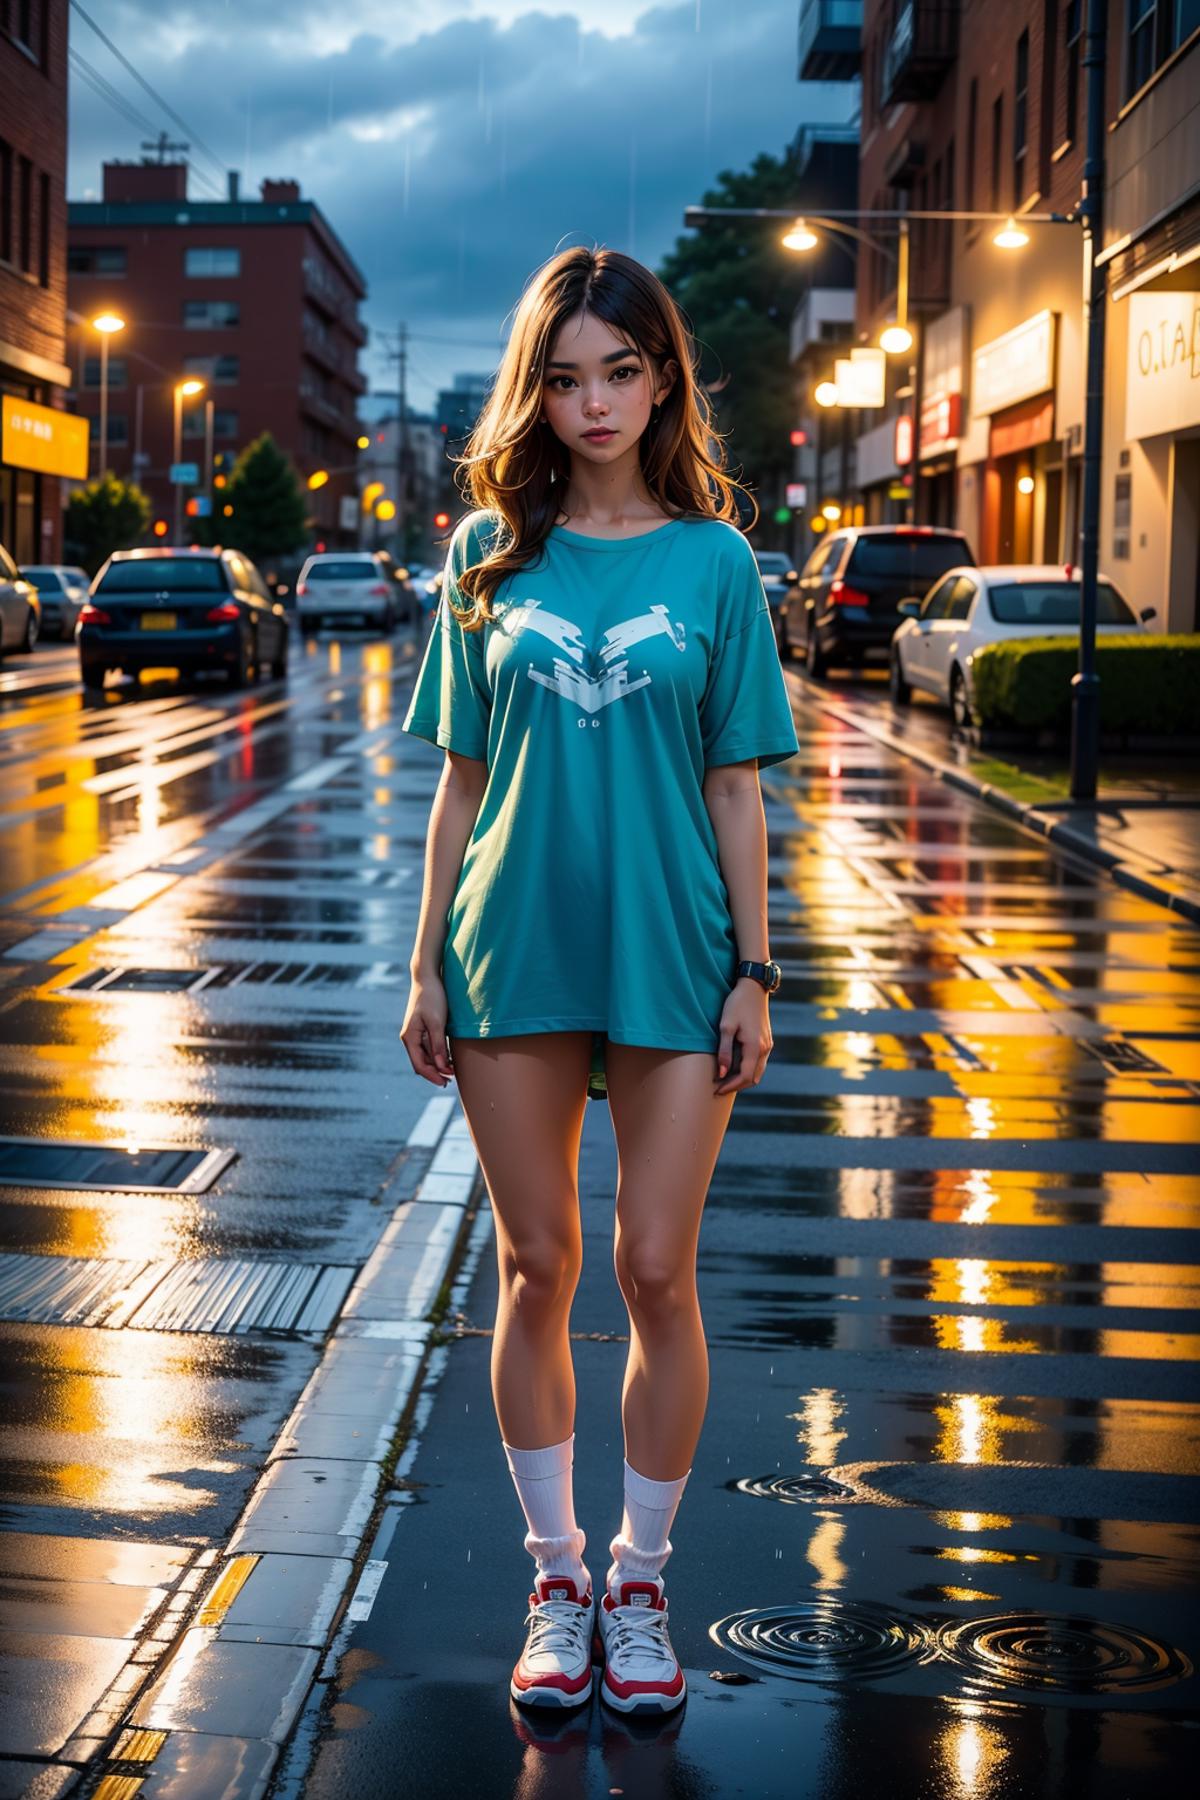 A woman wearing a teal shirt and white socks standing on a rain-soaked street.